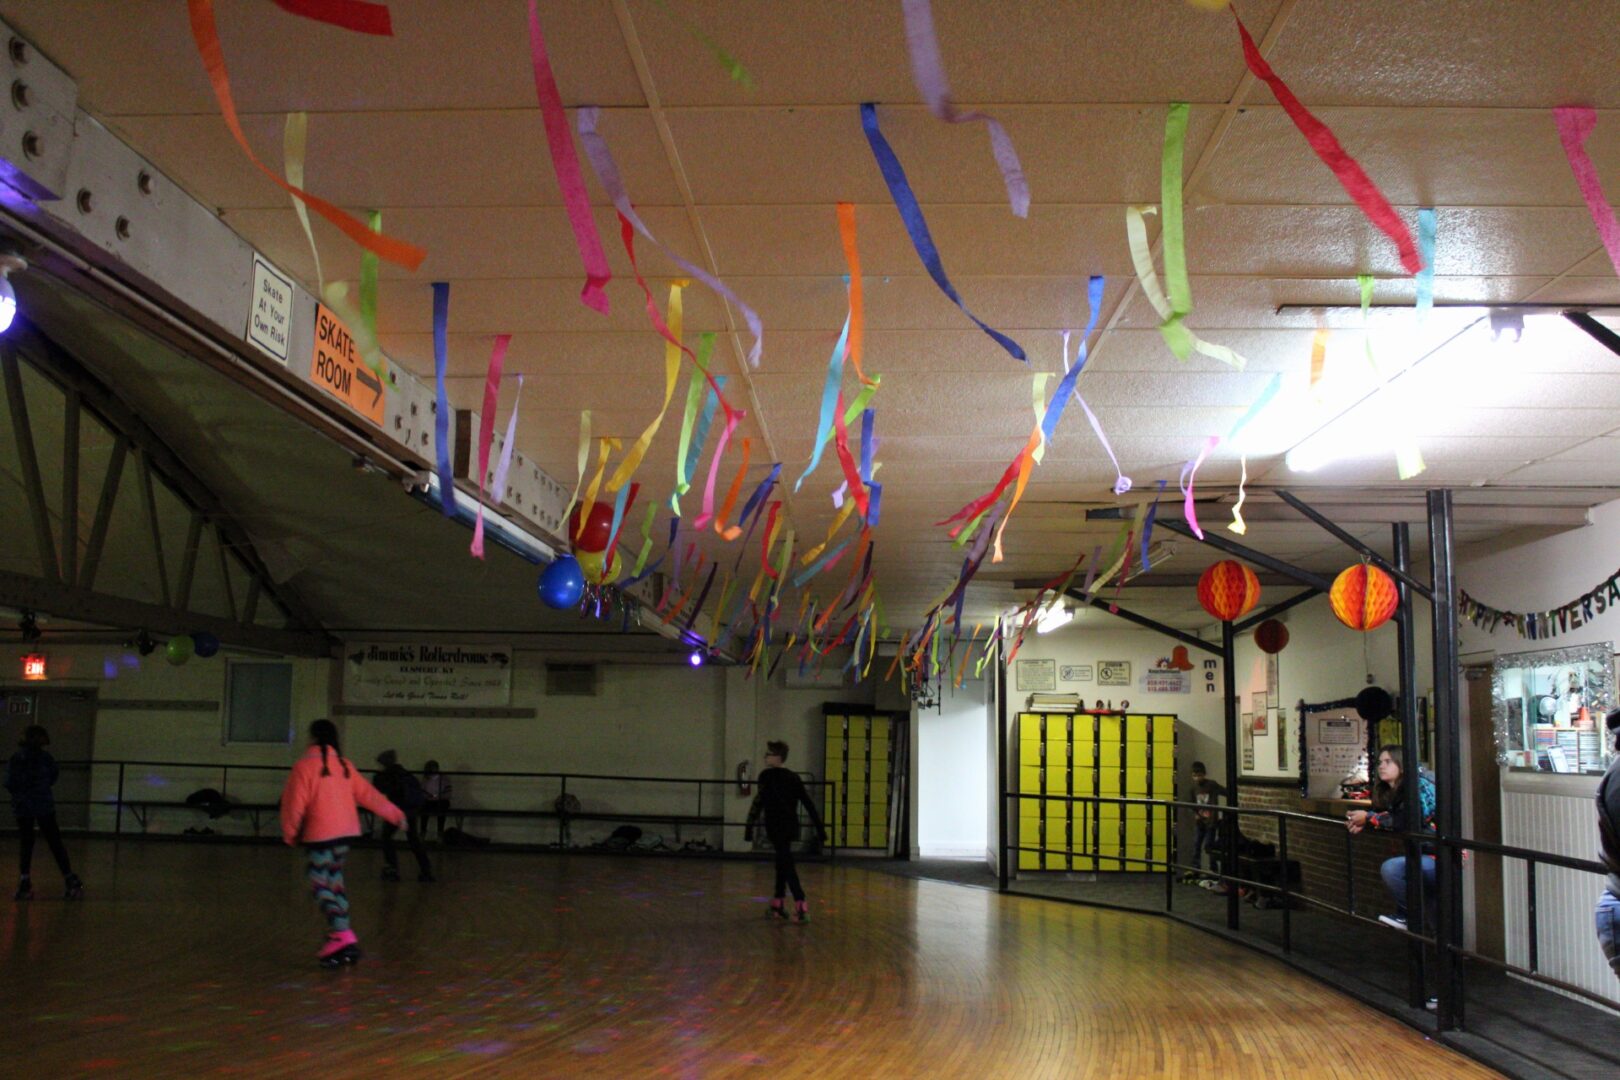 Streamers and decorations on the ceiling above our roller rink